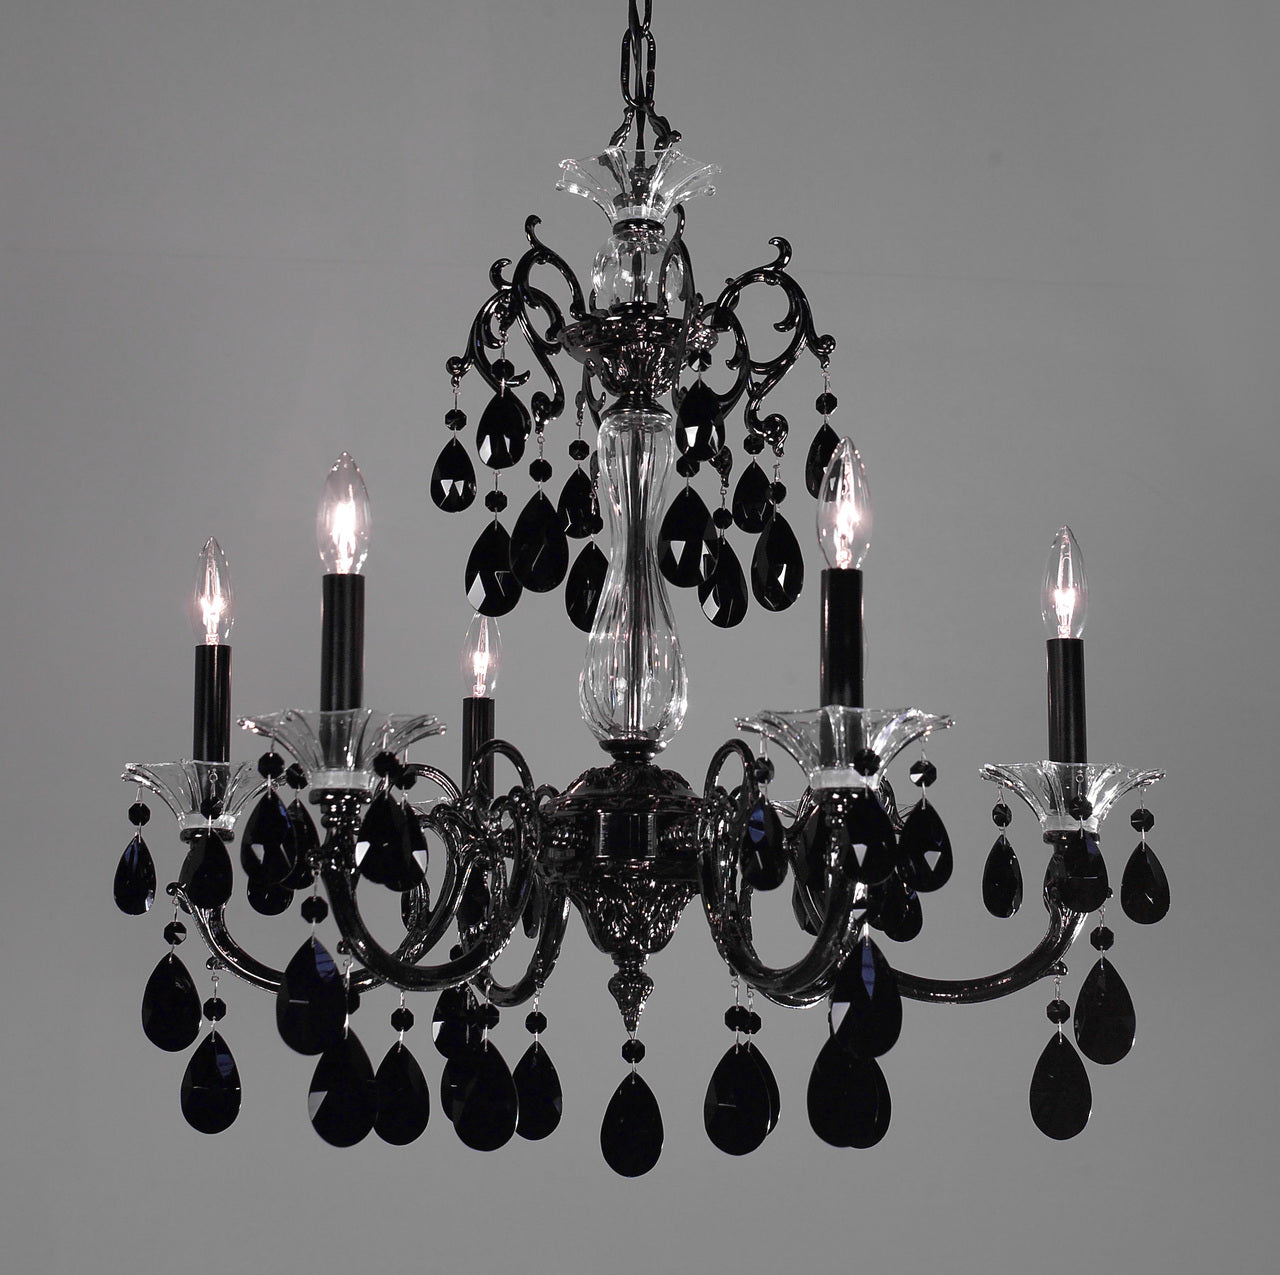 Classic Lighting 57056 EP SGT Via Lombardi Crystal Chandelier in Ebony Pearl (Imported from Spain)